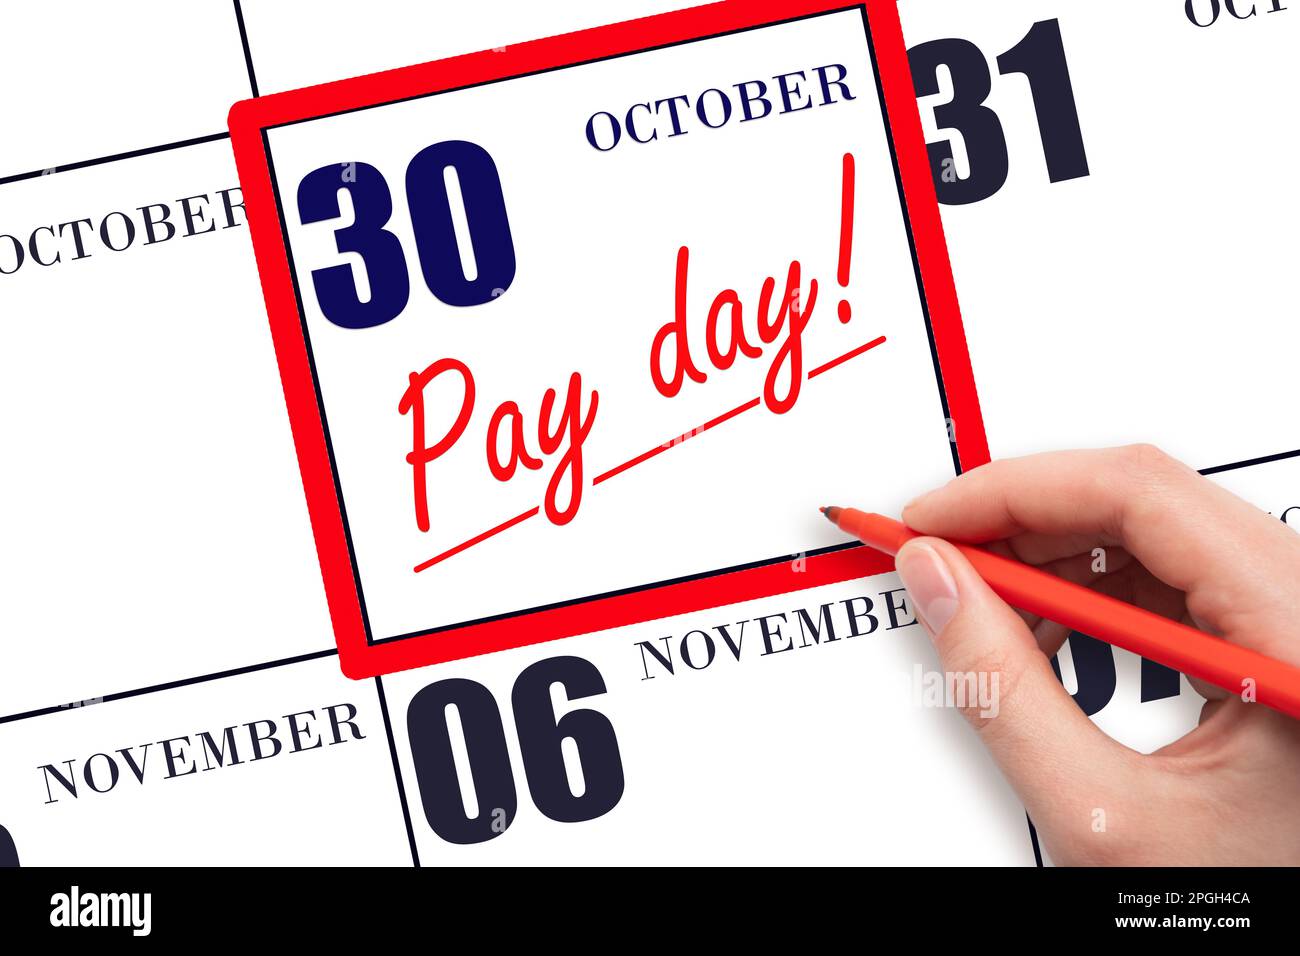 30th day of October. Hand writing text PAY DATE on calendar date October 30 and underline it. Payment due date. Reminder concept of payment. Autumn mo Stock Photo